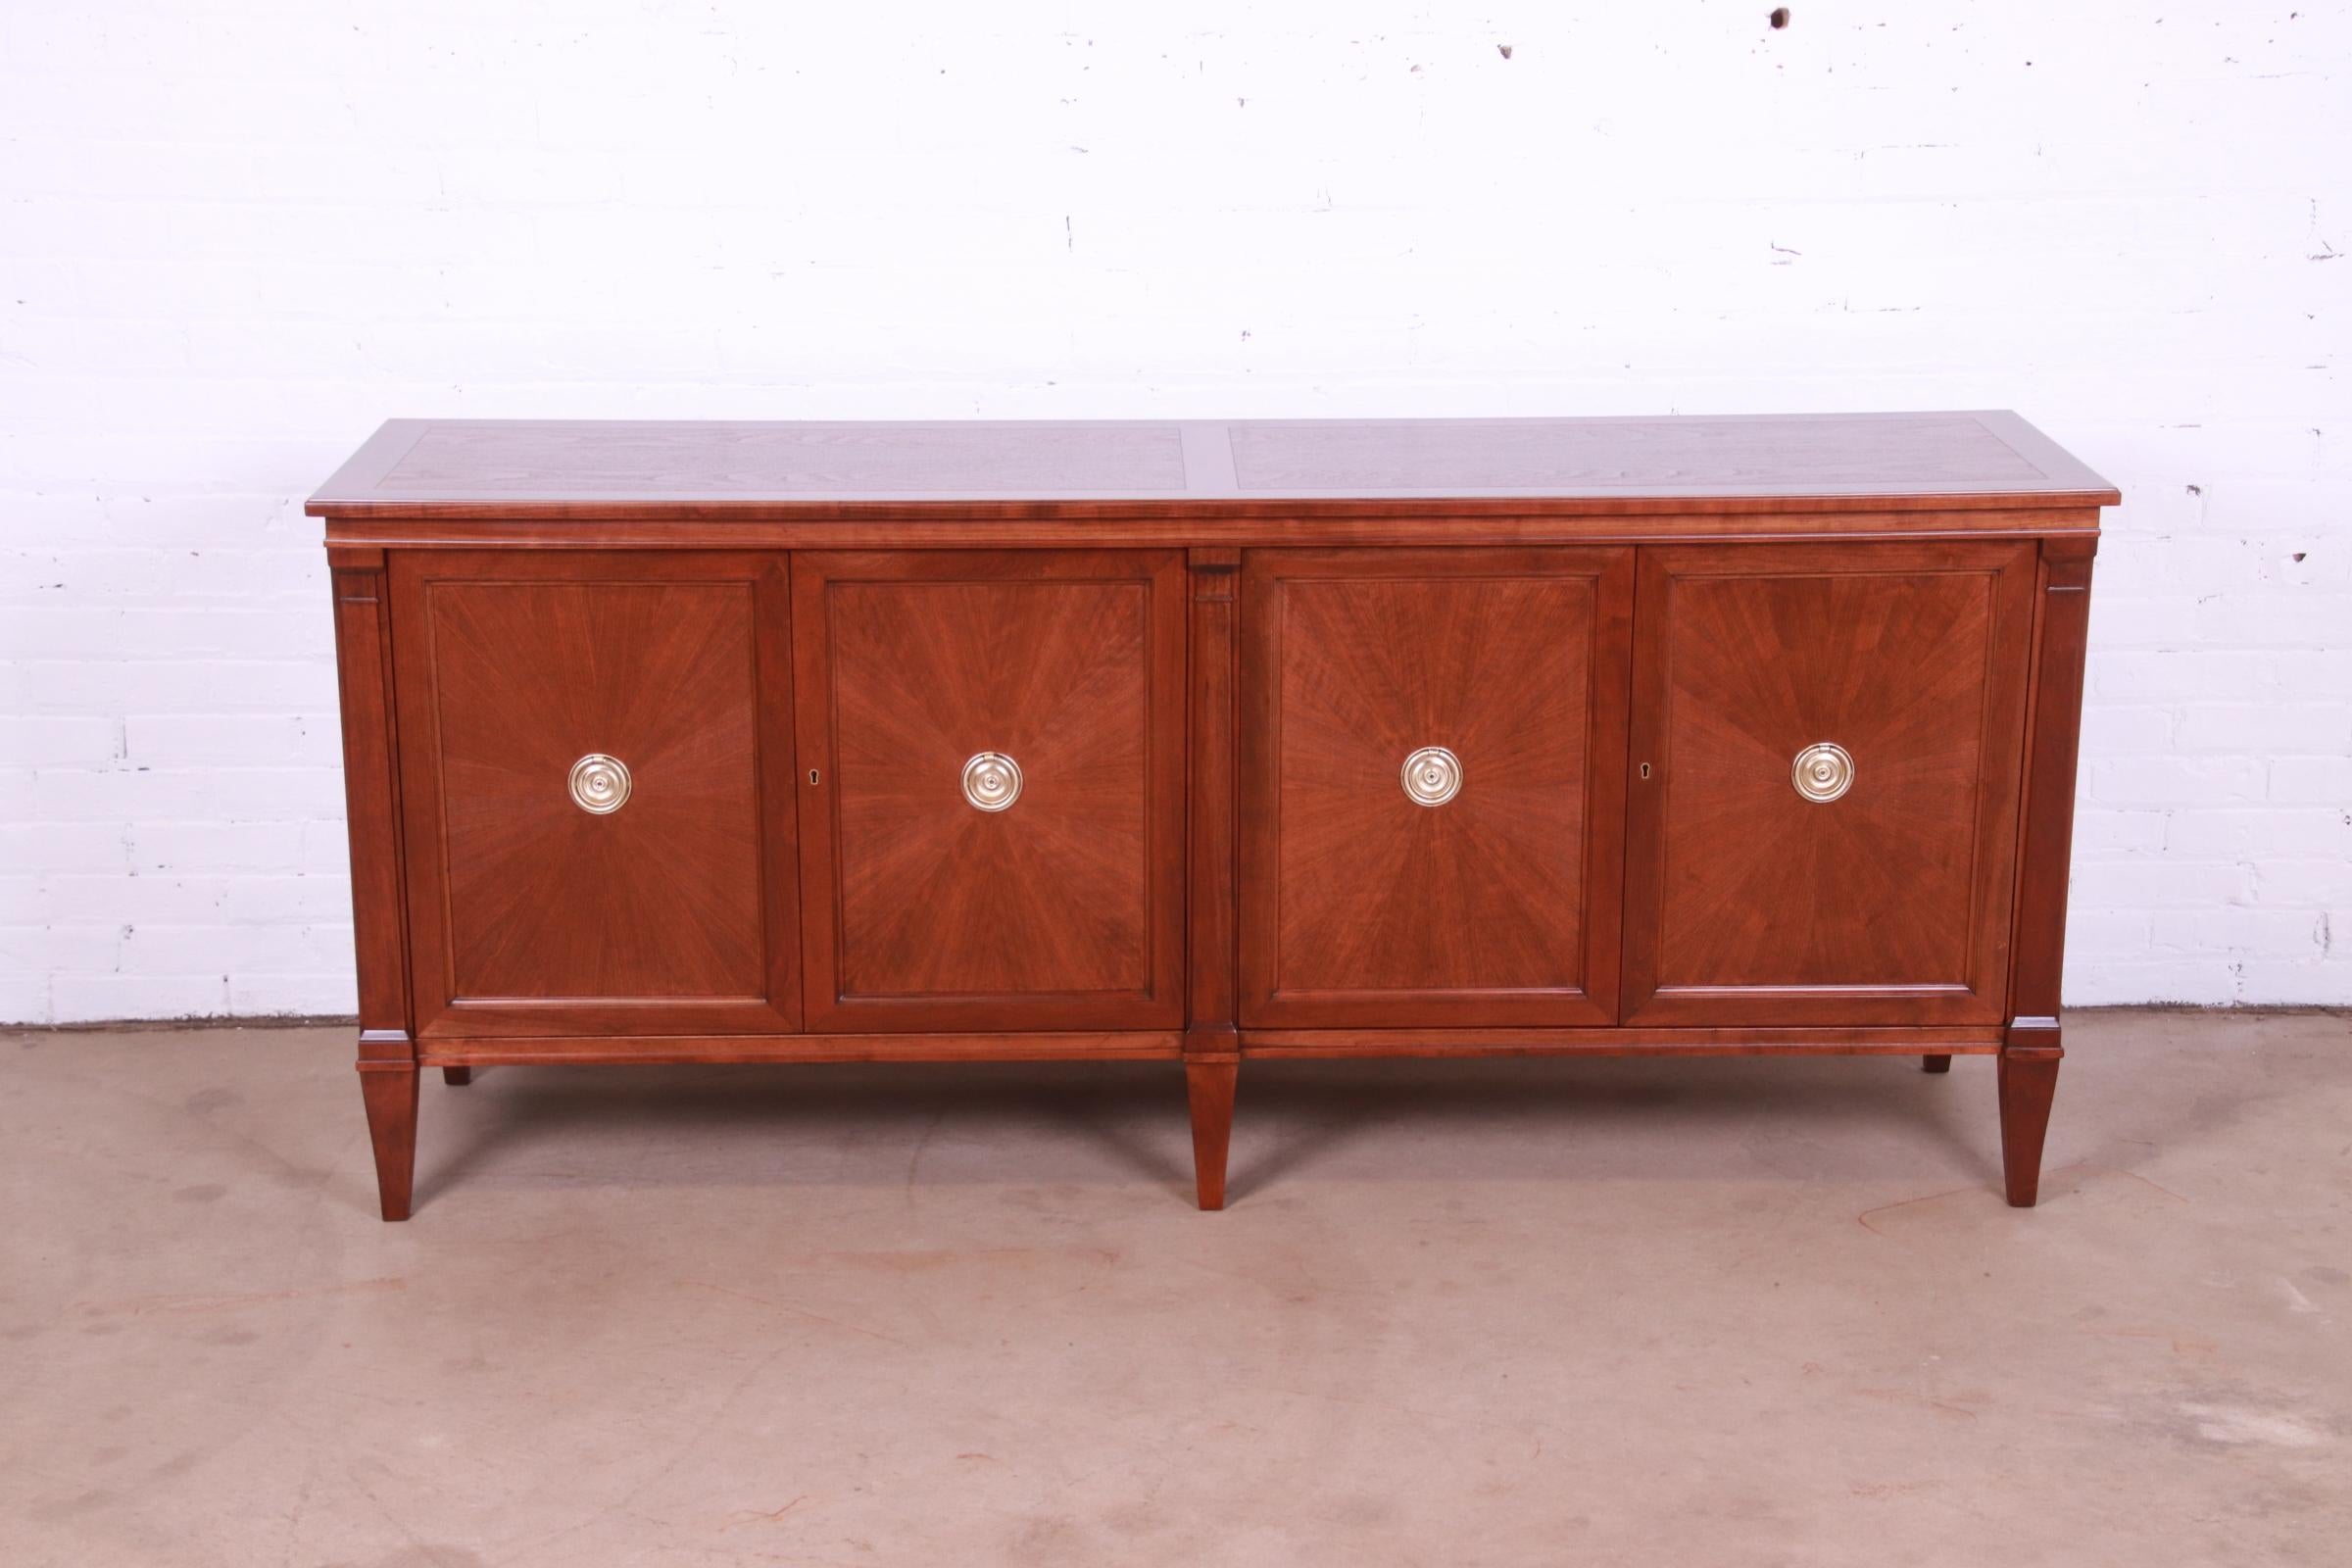 A gorgeous French Regency style sideboard, credenza, or bar cabinet

By Baker Furniture

USA, Circa 1960s

Carved walnut, with starburst design on doors, and original brass hardware.

Measures: 74.5